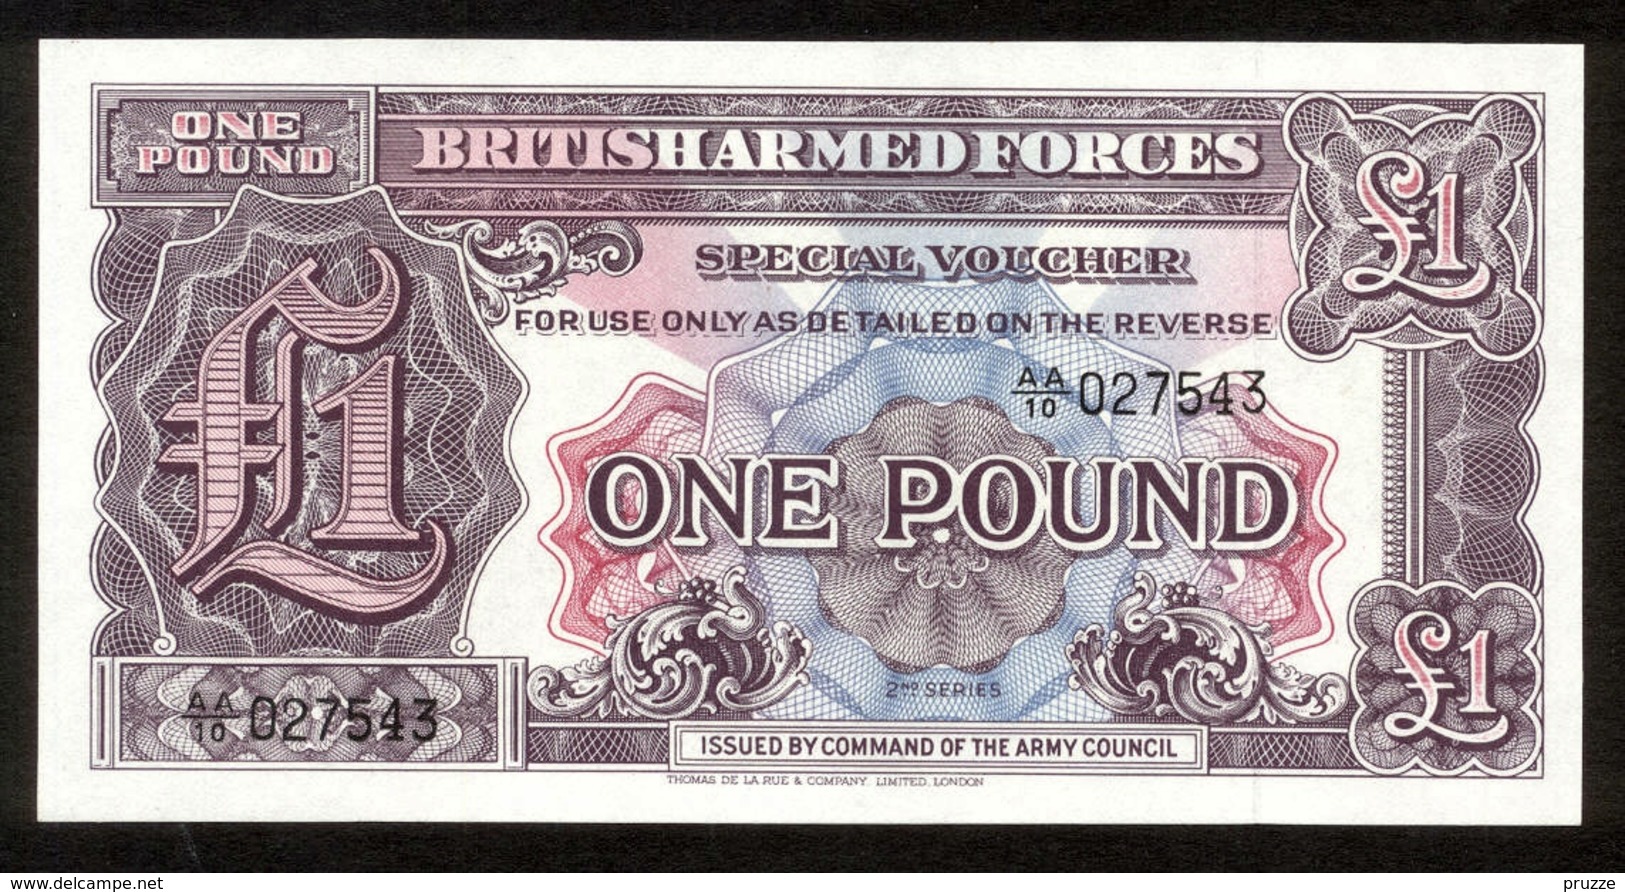 British Armed Forces 1948, 1 Pound - UNC - AA 10 027543 - British Armed Forces & Special Vouchers